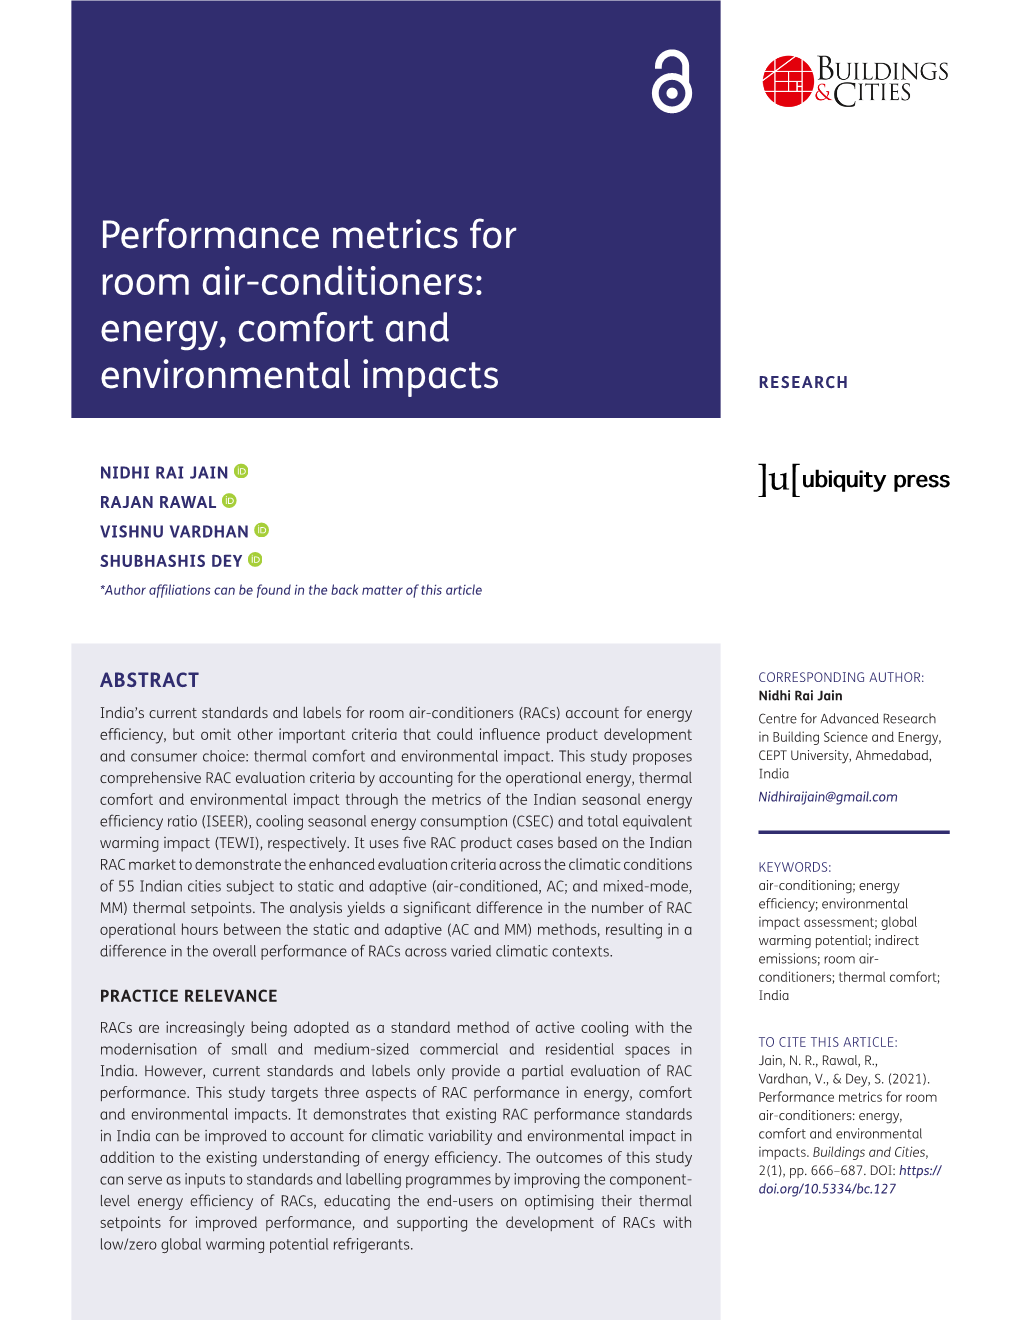 Performance Metrics for Room Air-Conditioners: Energy, Comfort and Environmental Impacts RESEARCH